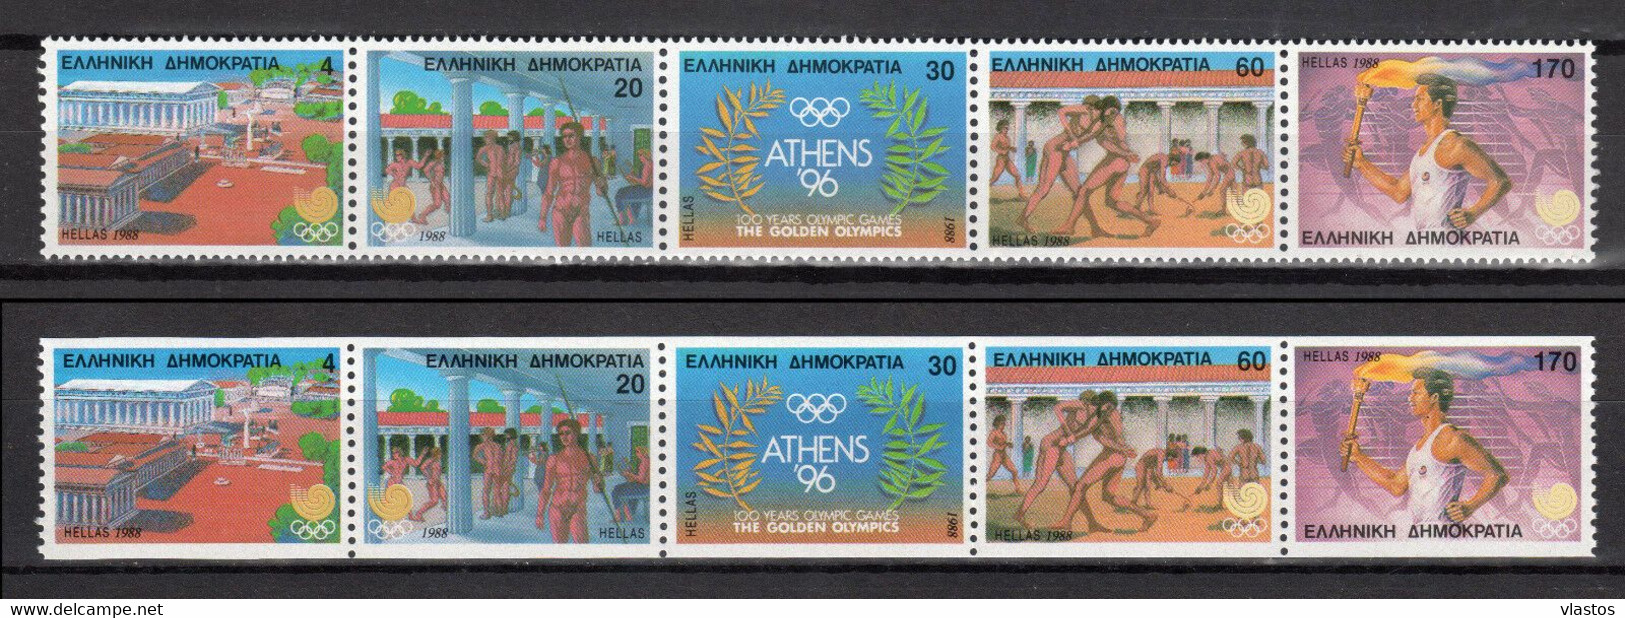 GREECE 1988 COMPLETE YEAR - PERFORATED+IMPERFORATED STAMPS MNH - Años Completos